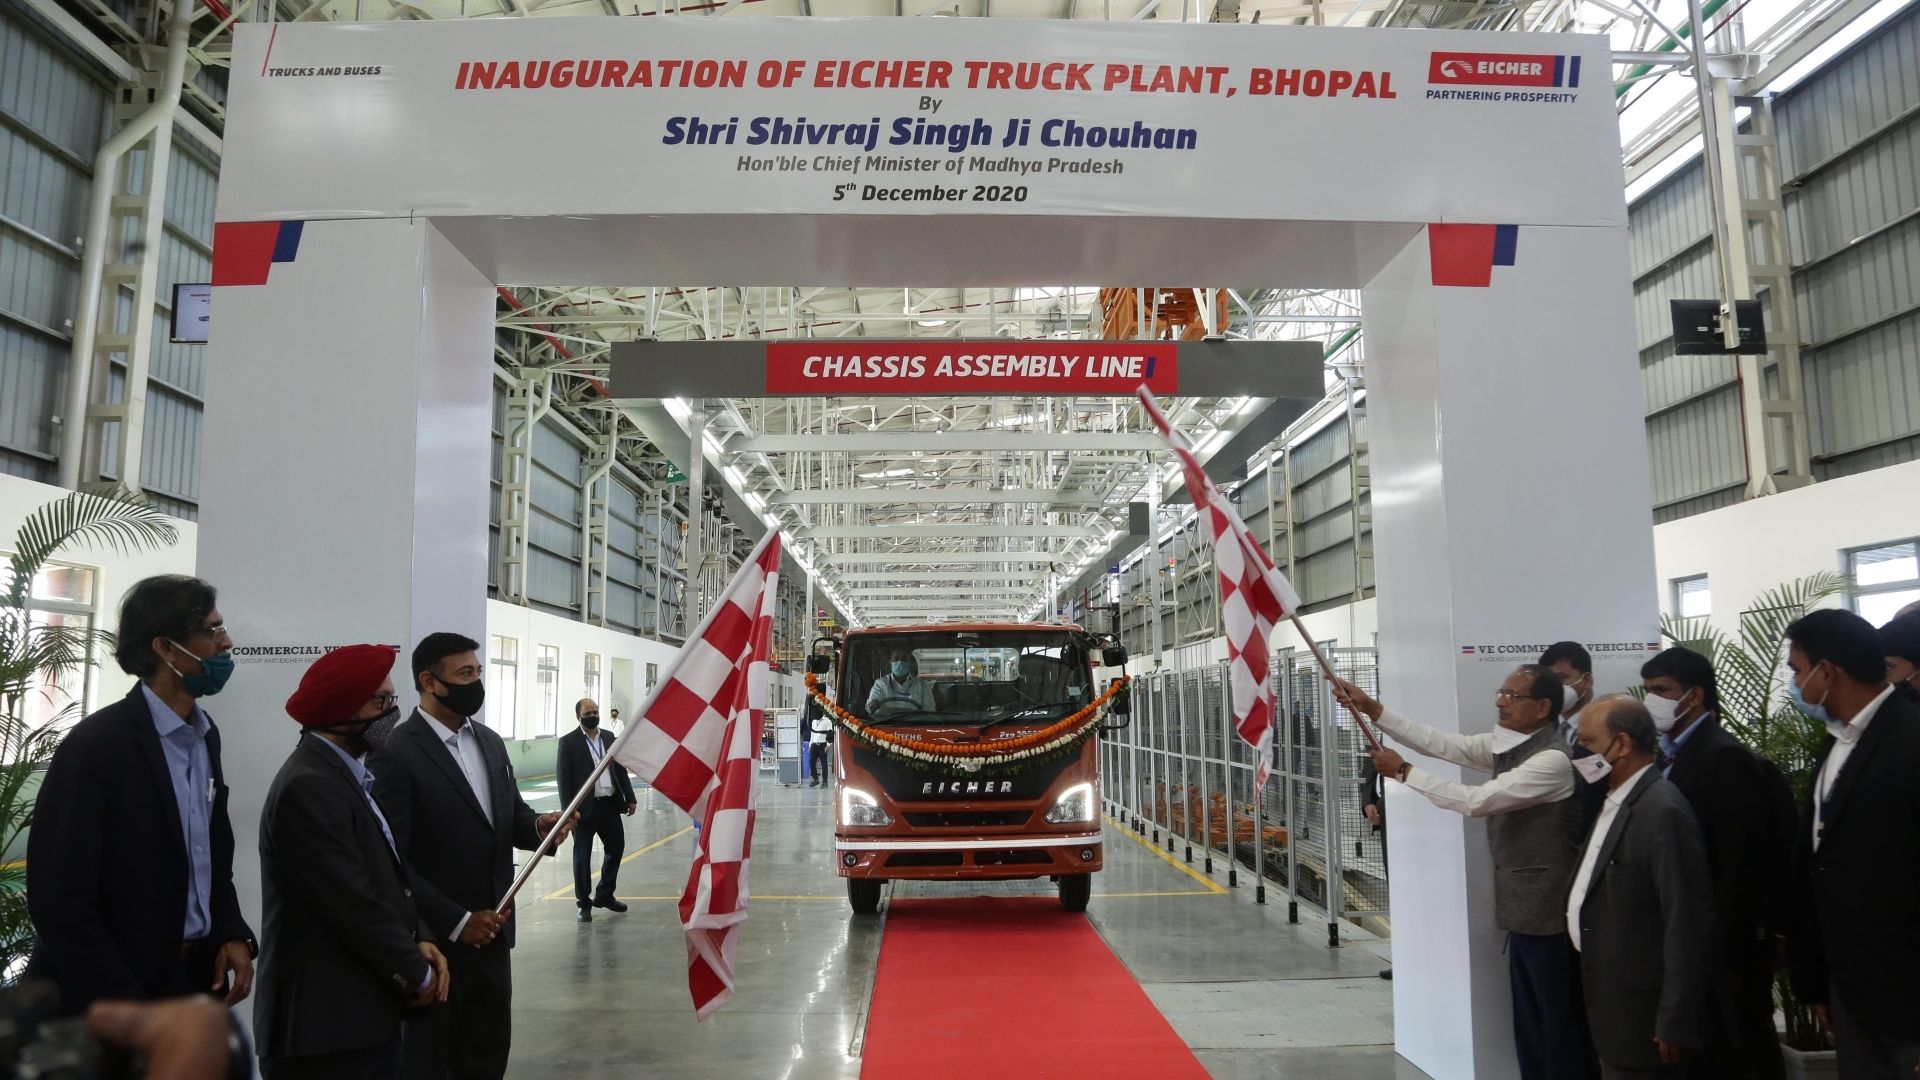 VE Commercial Vehicles (VECV) commences production at its new Truck Plant at Bhopal